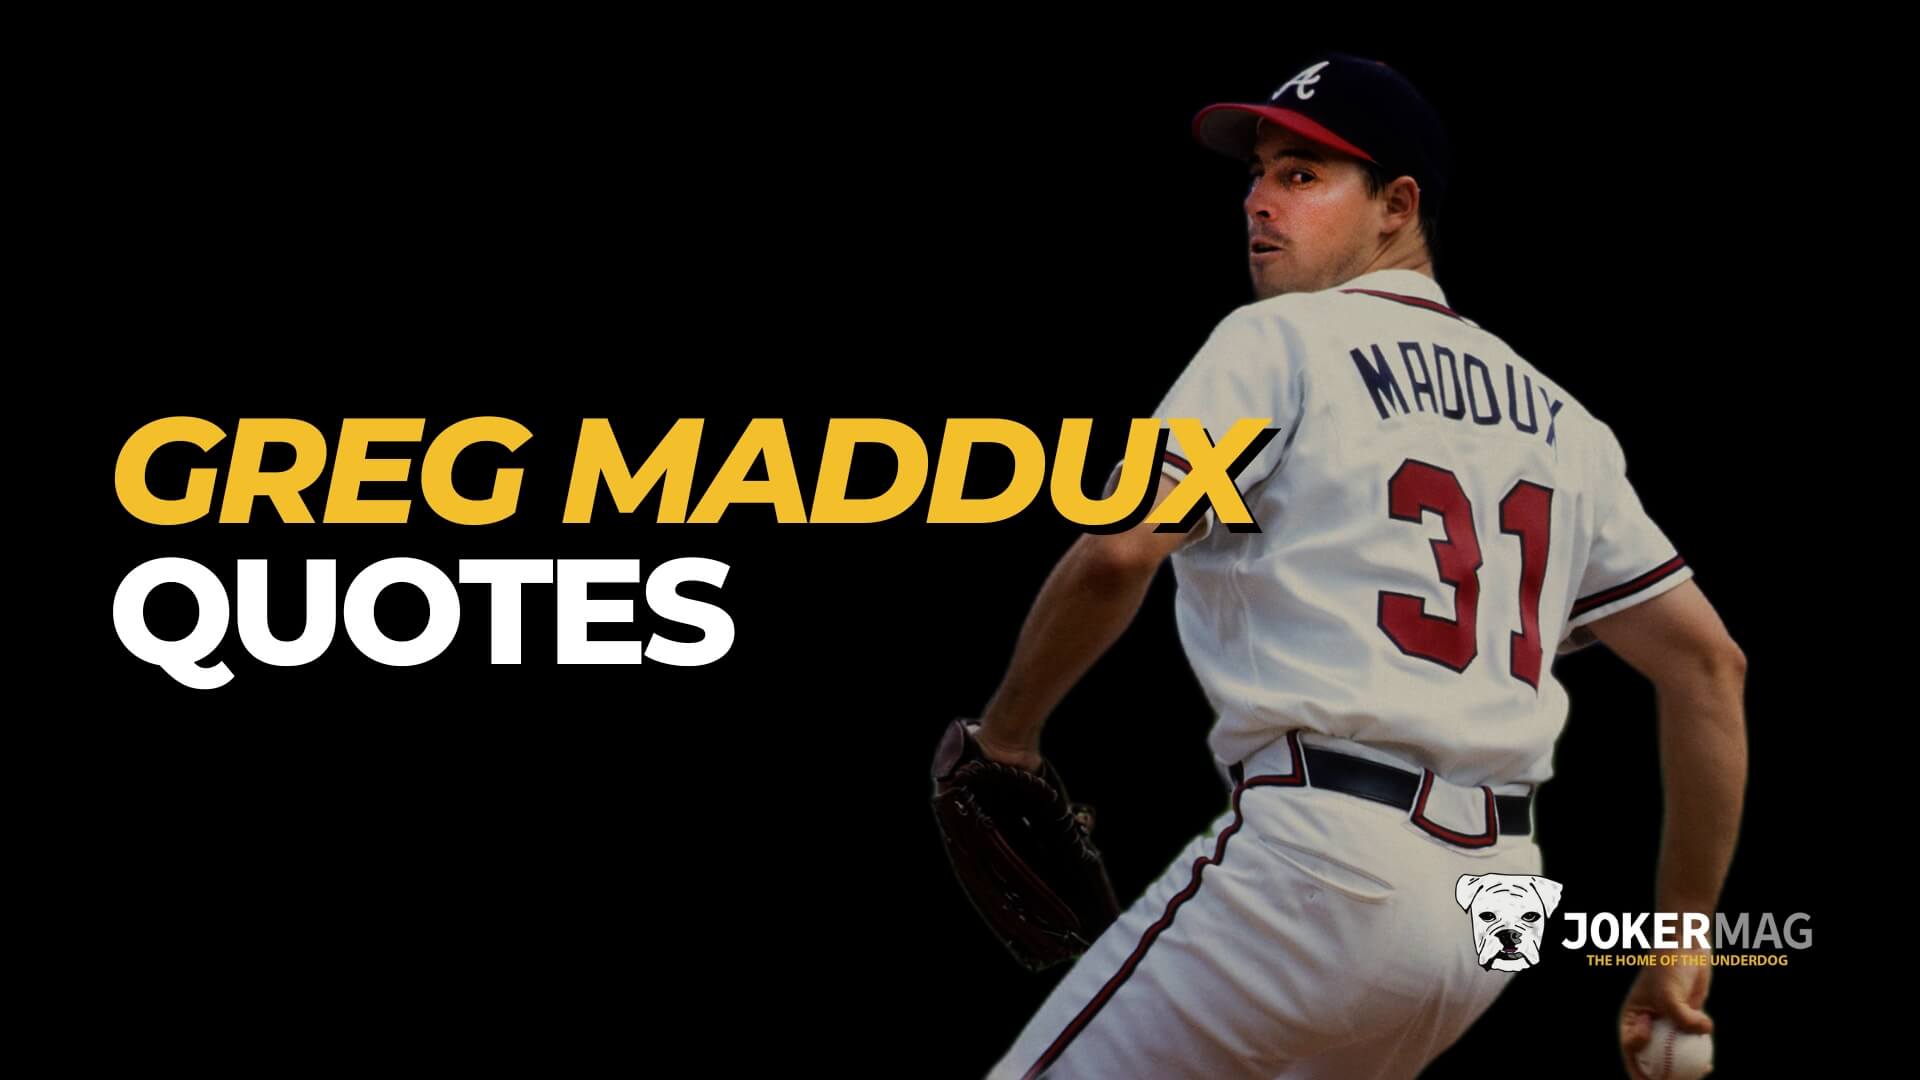 Greg Maddux quotes from the Hall of Fame pitcher